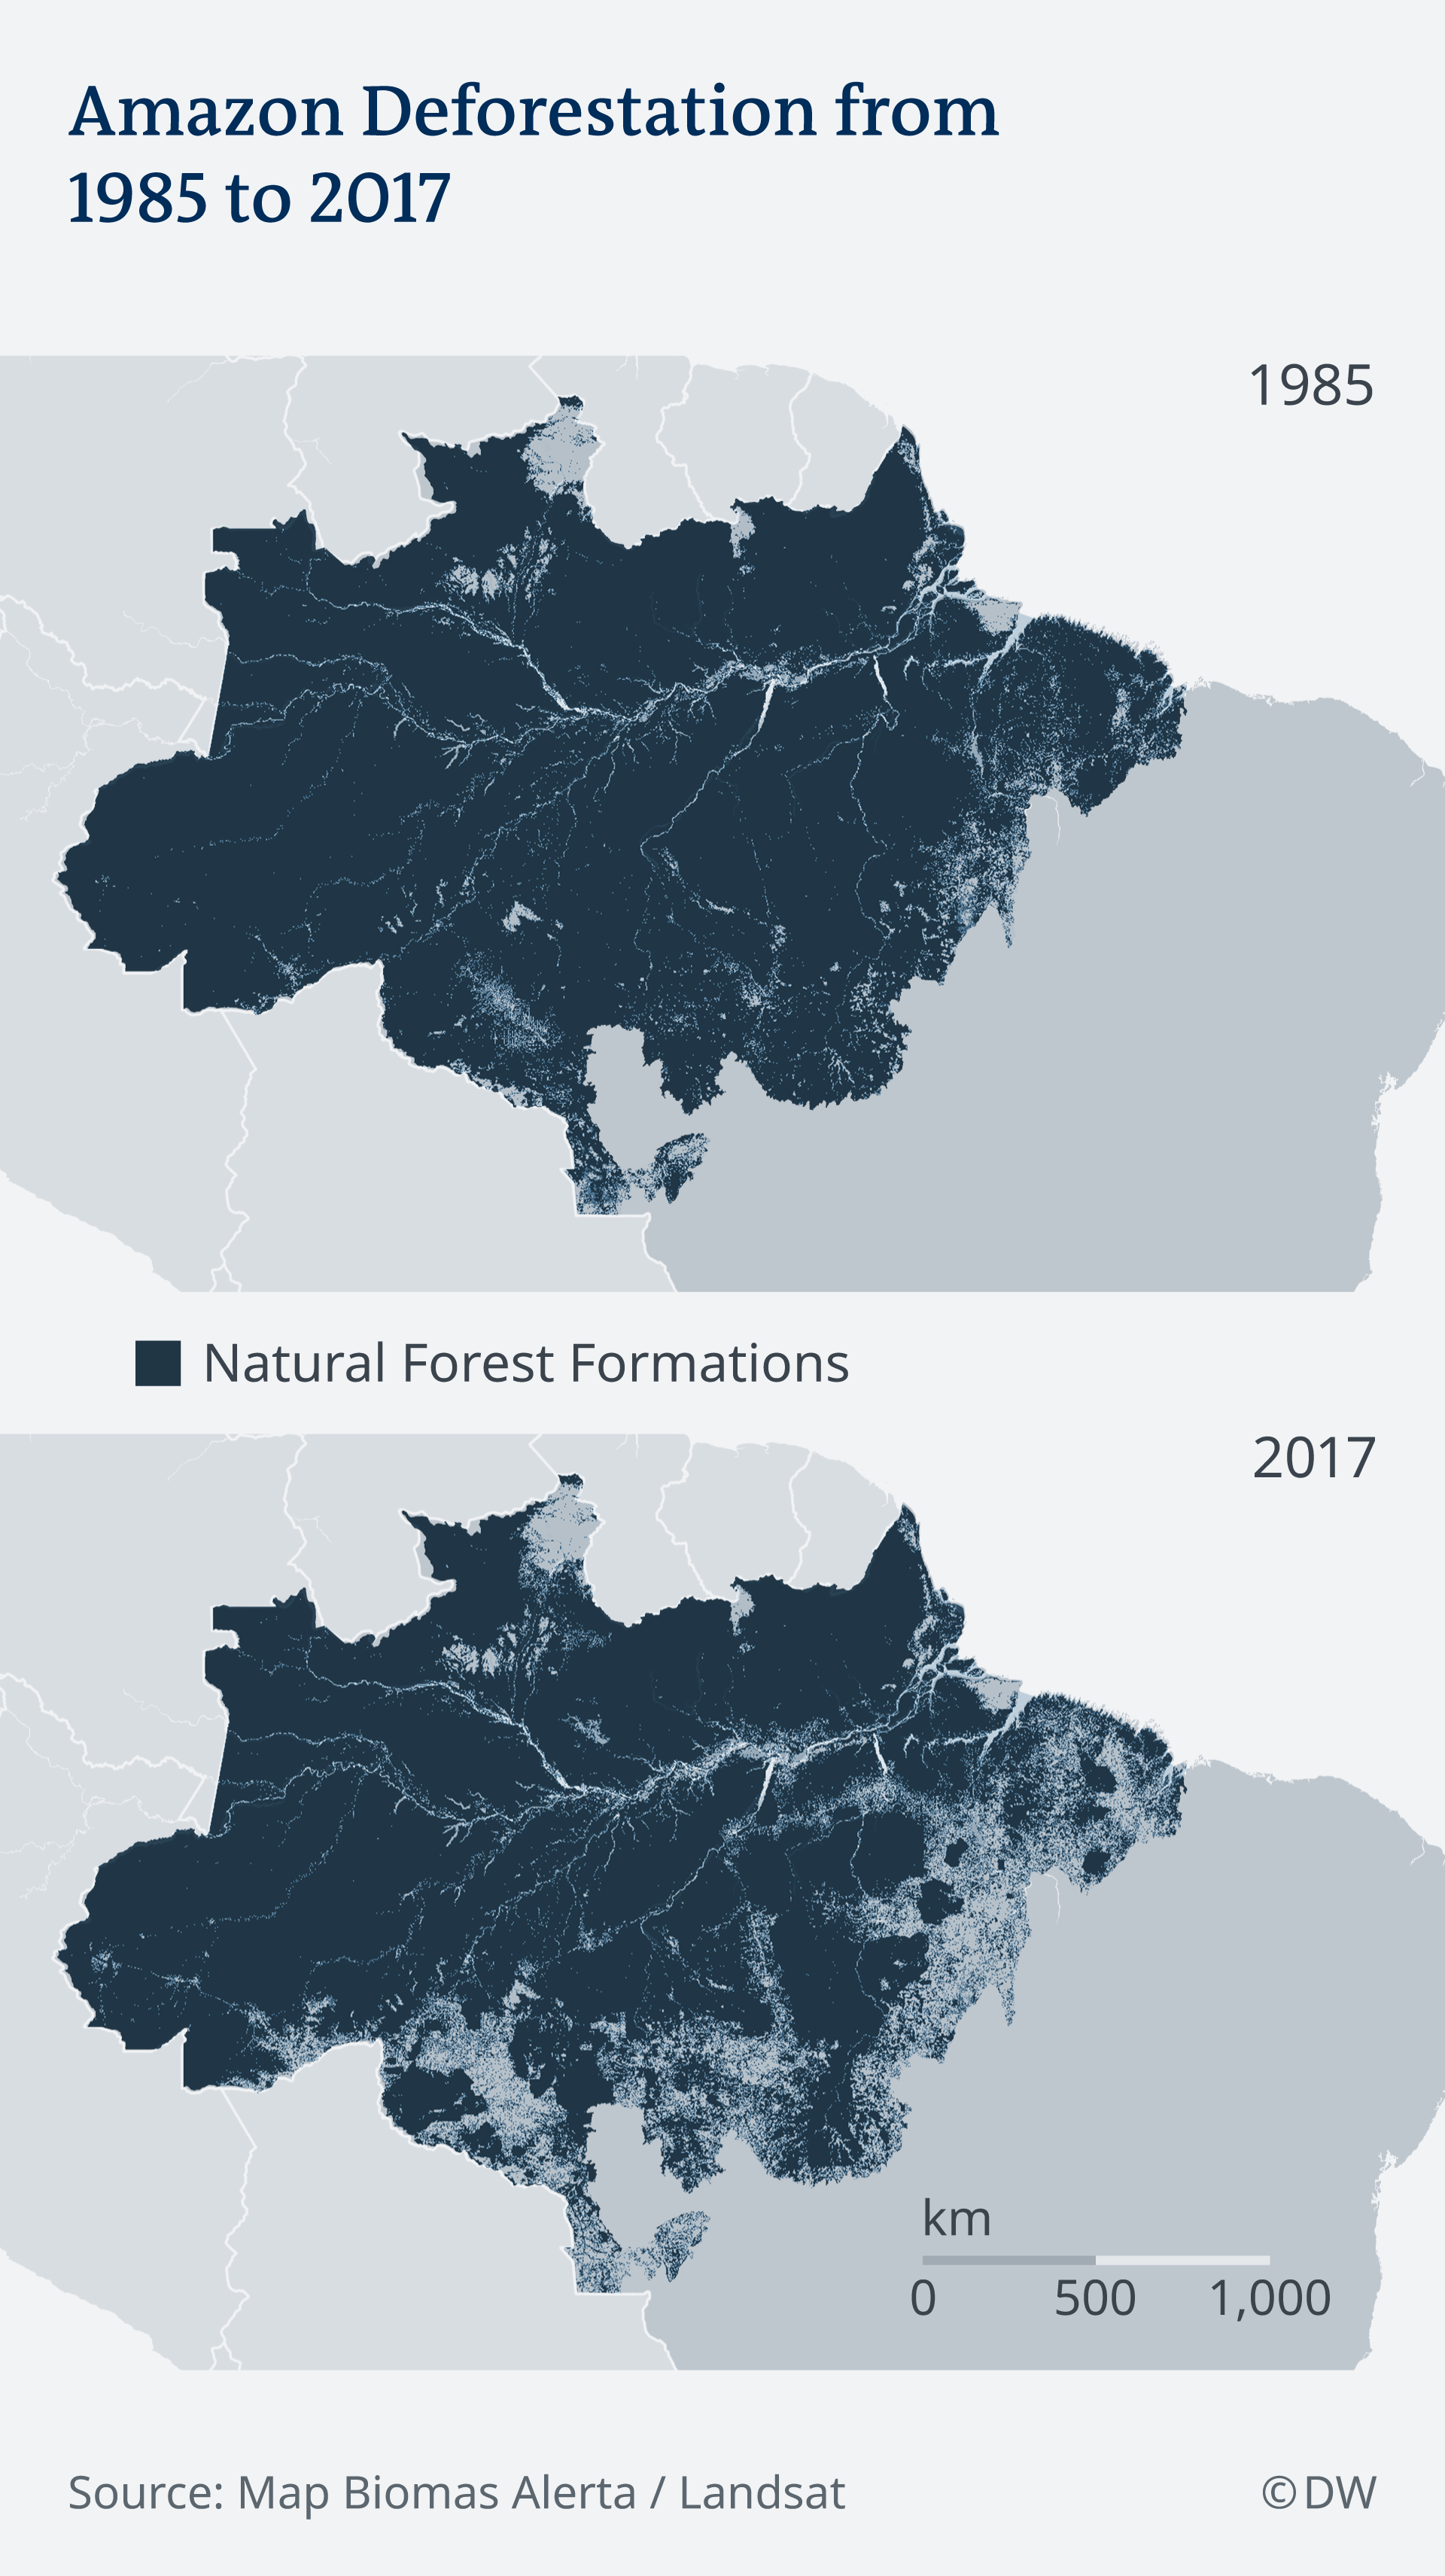 Amazon deforestation from 1985 to 2017